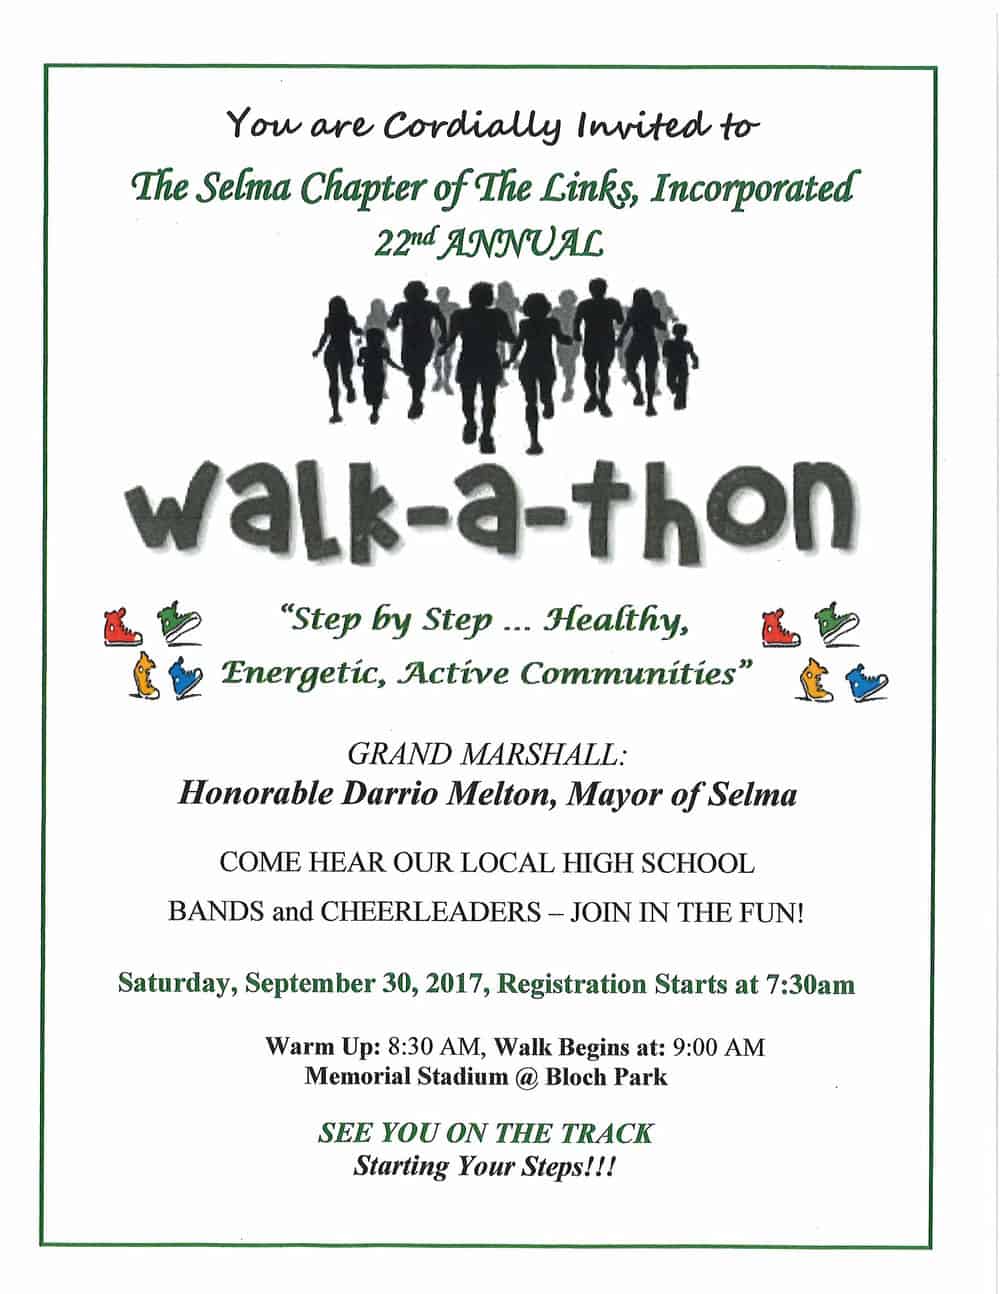 Link Walk a thon Page 1